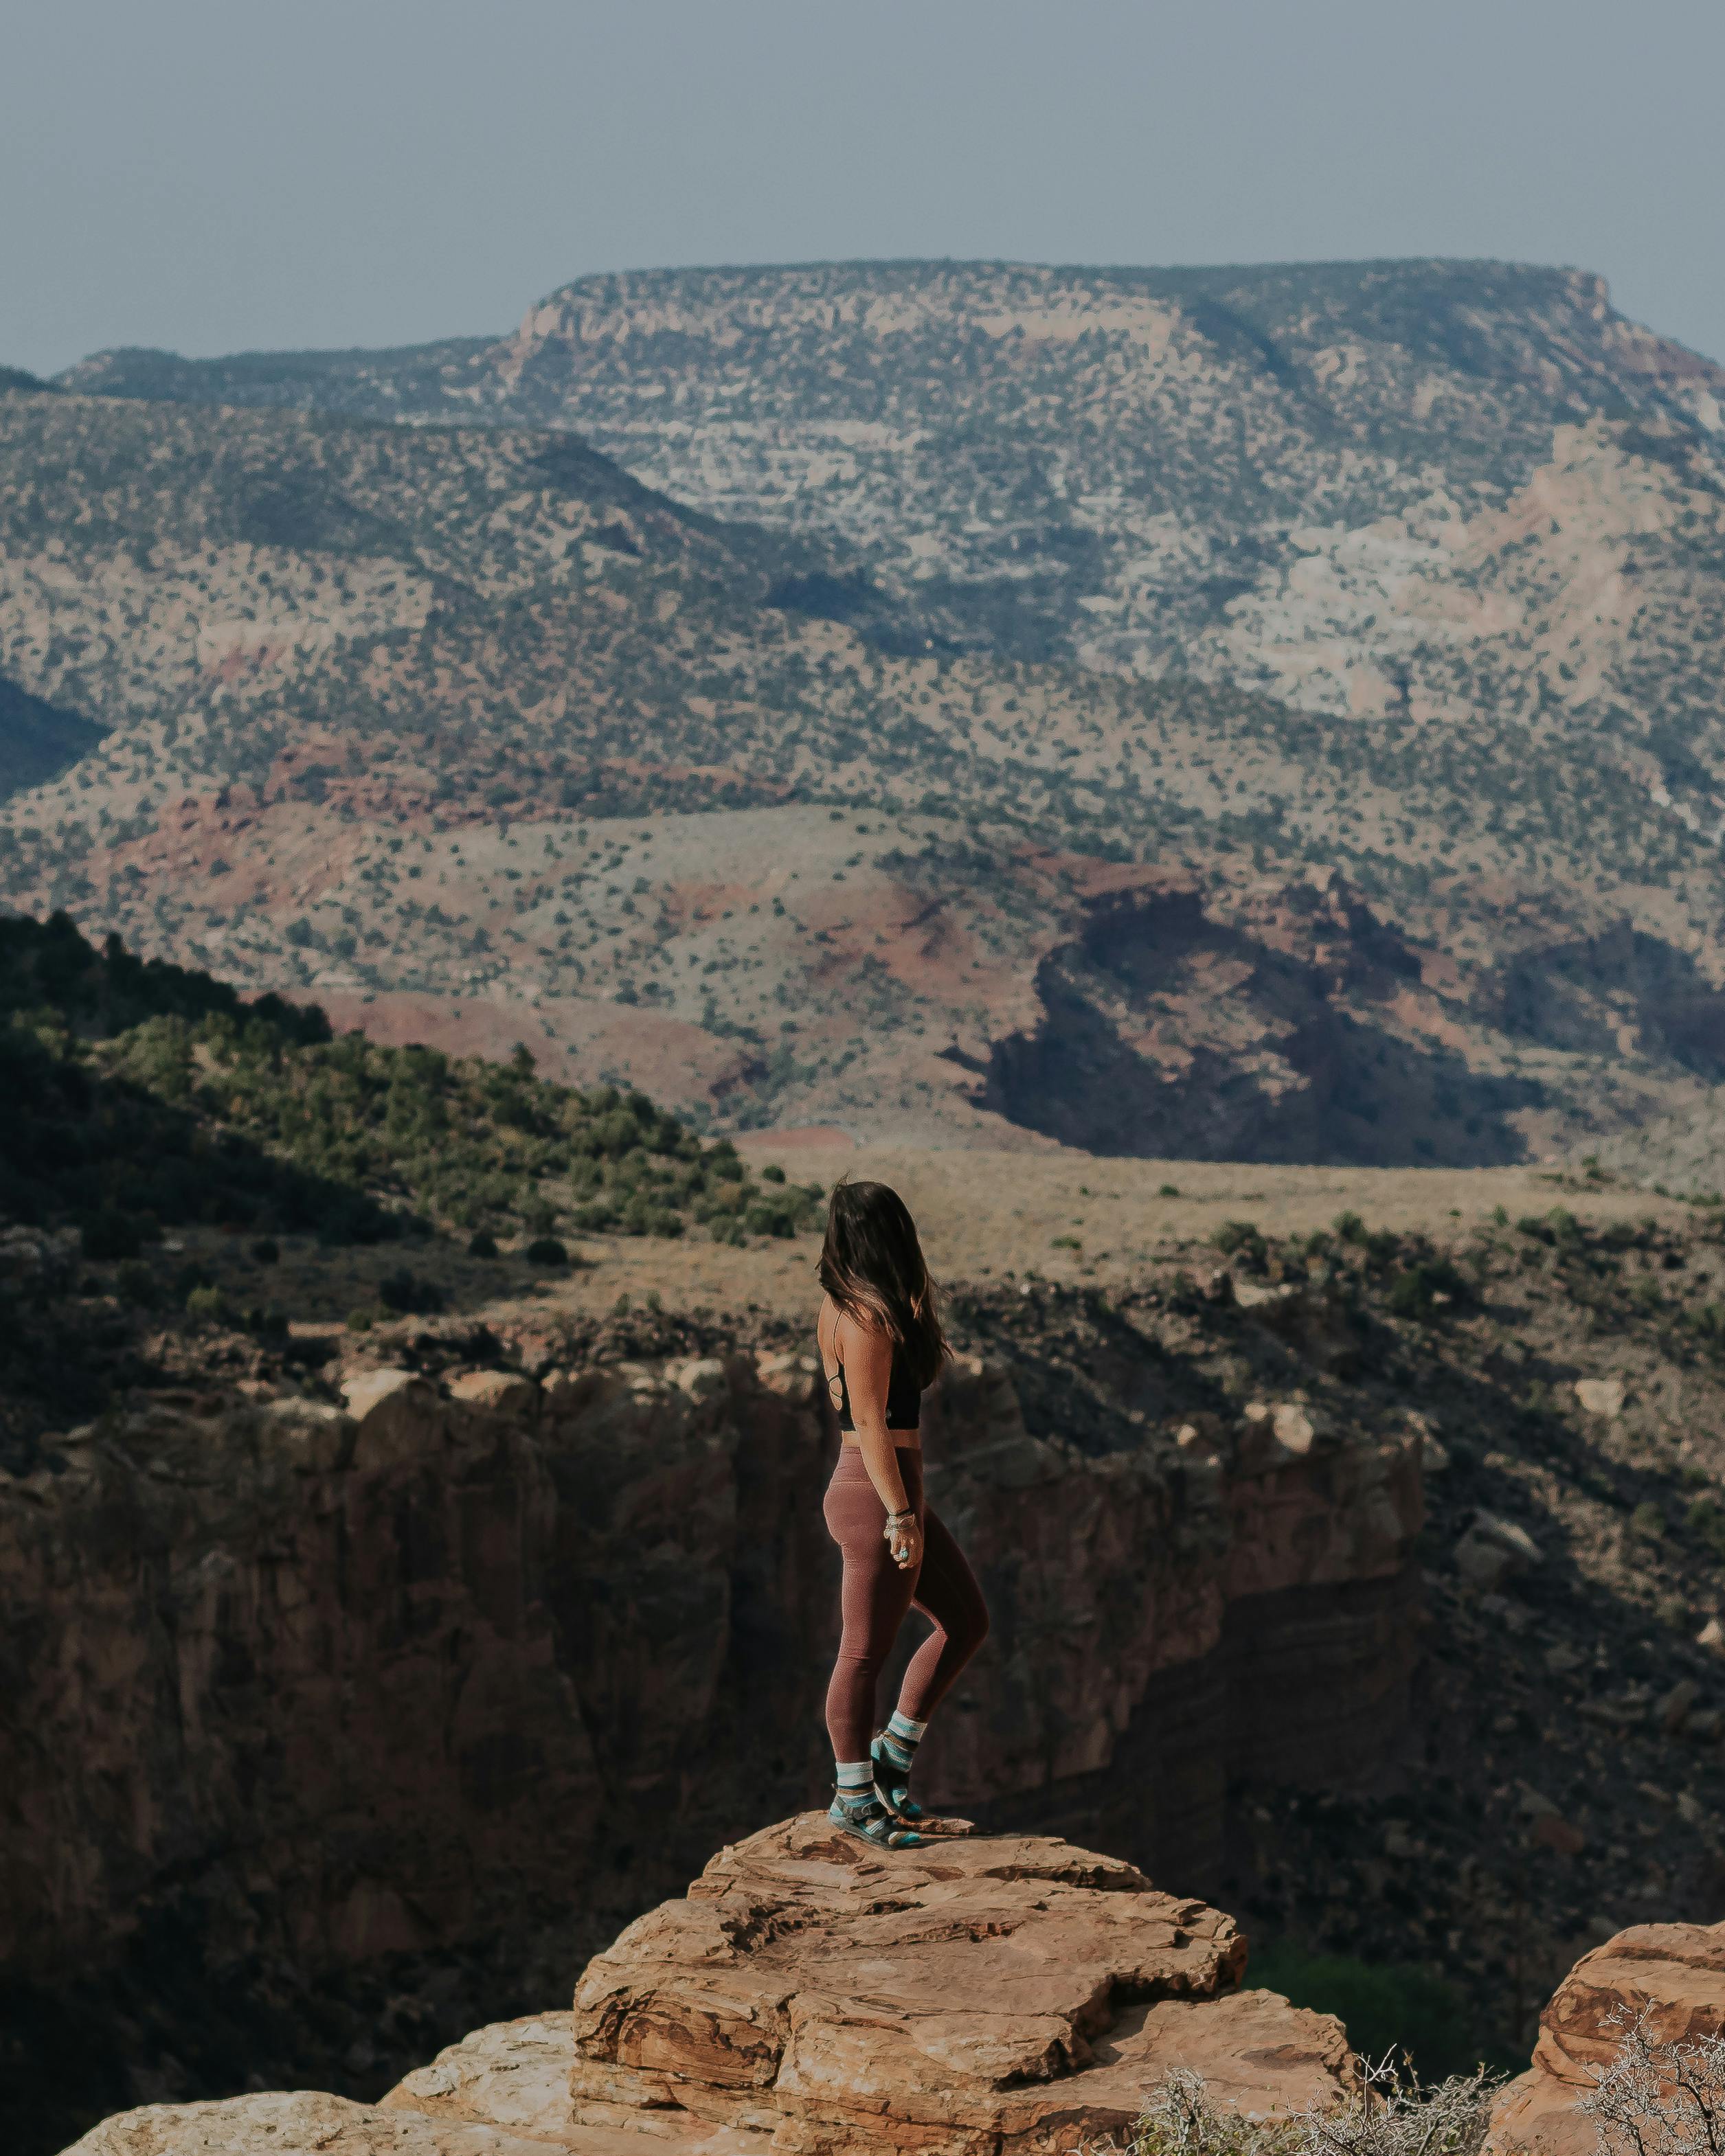 Woman gazing out at canyon views in Oboz hiking shoes in Captiol Reef. National ParkImage credit: Lindsay Kagalis